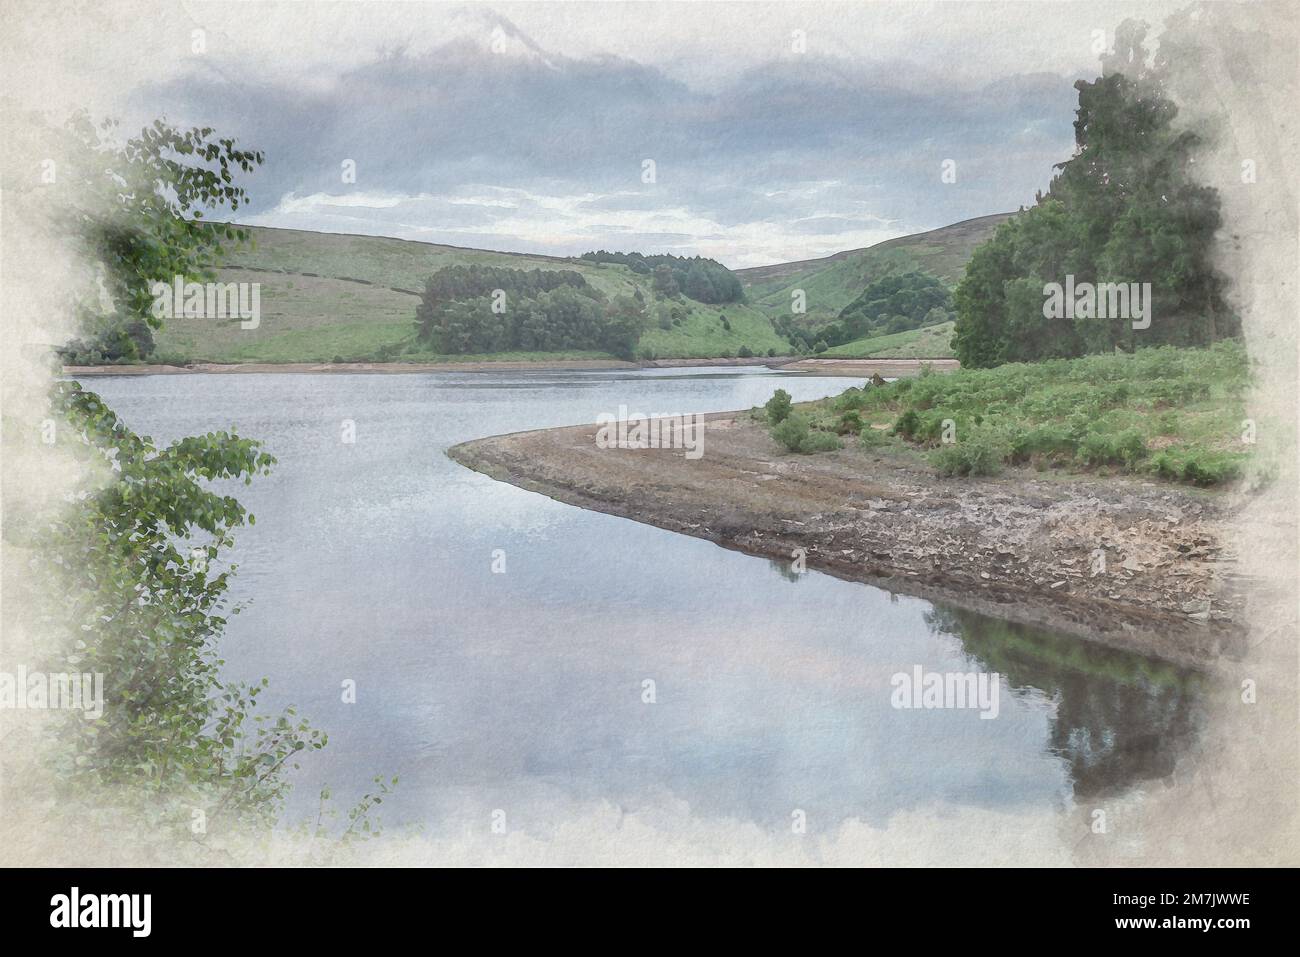 Digital watercolor painting of the reservoir at Upper Goyt Valley, Derbyshire within the Peak District National Park, UK. Stock Photo